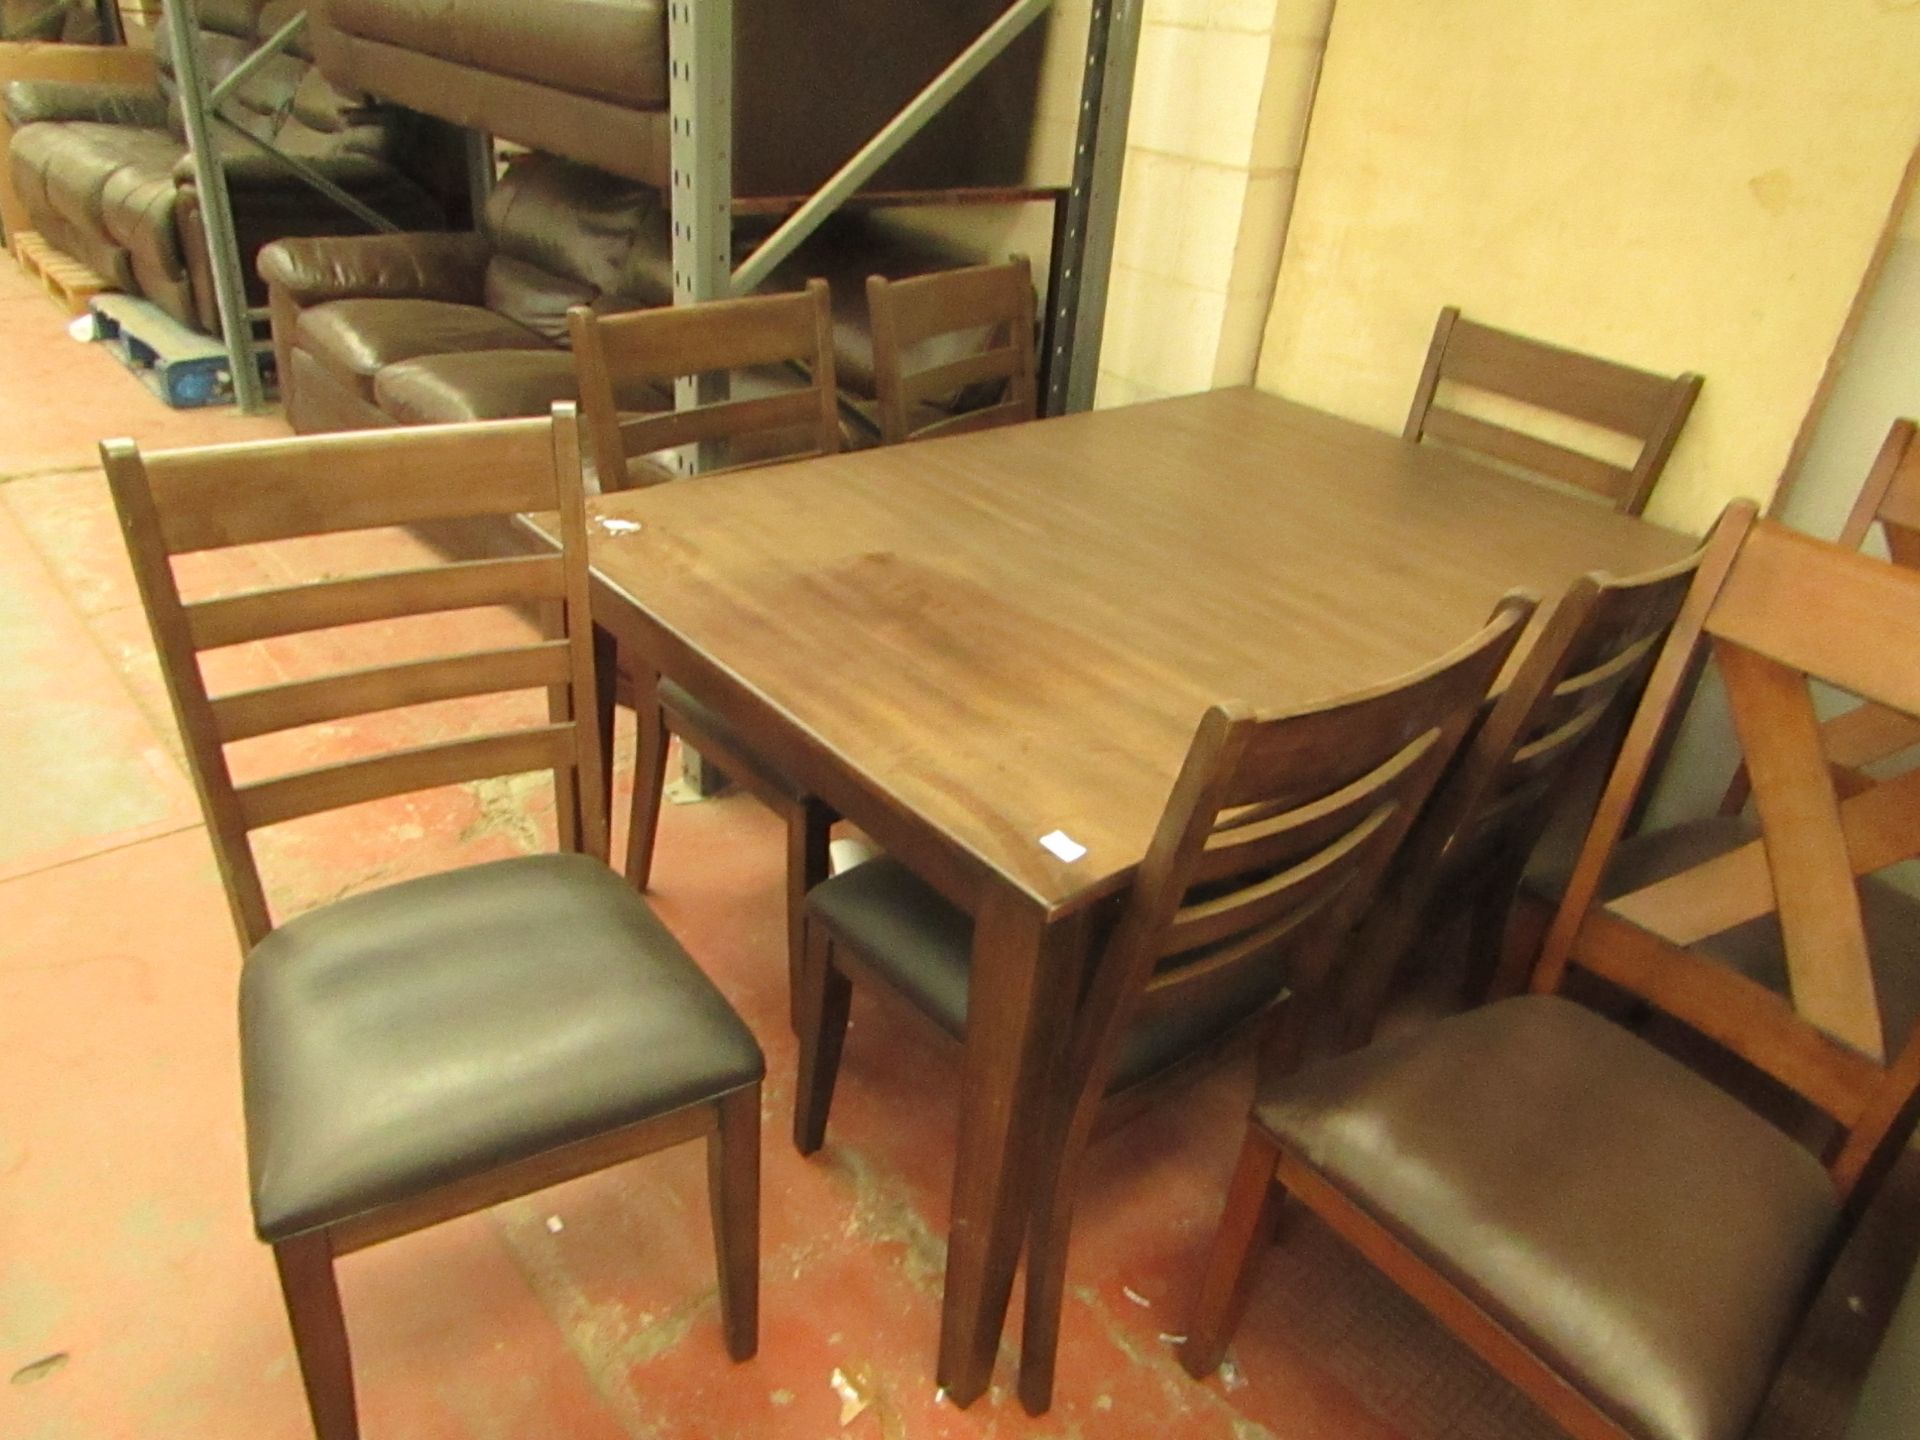 Bayside Furnishings extending dining table with 6 chairs, no major damage, a few scuffs on chairs